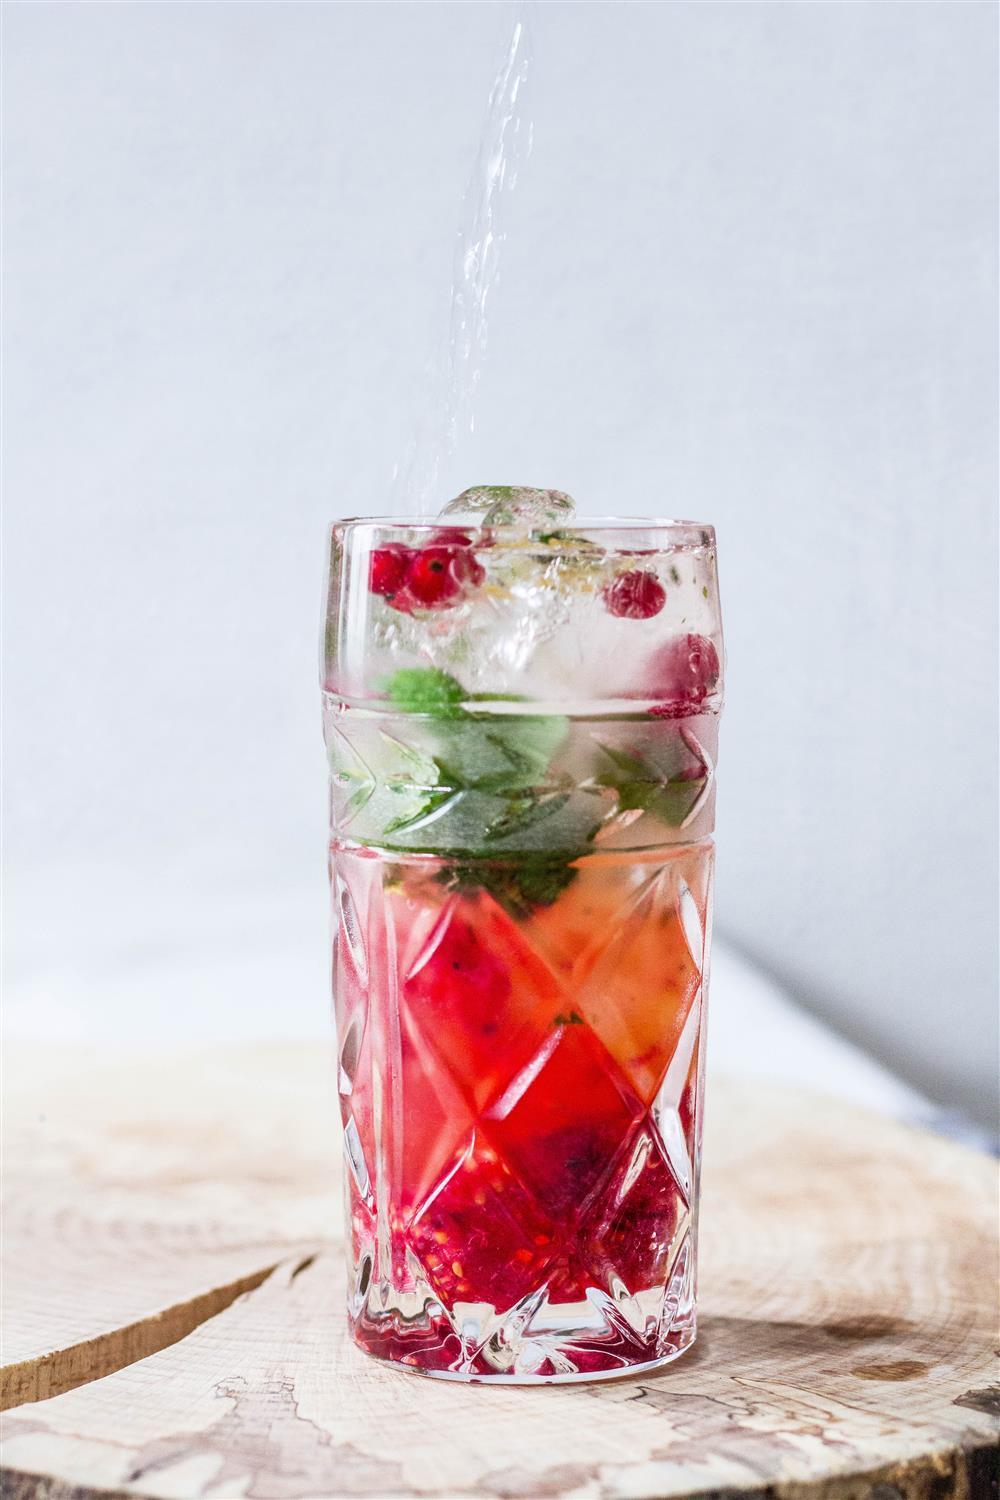 Use Your Noodles - Red Currant, Orange & Mint Mojitos